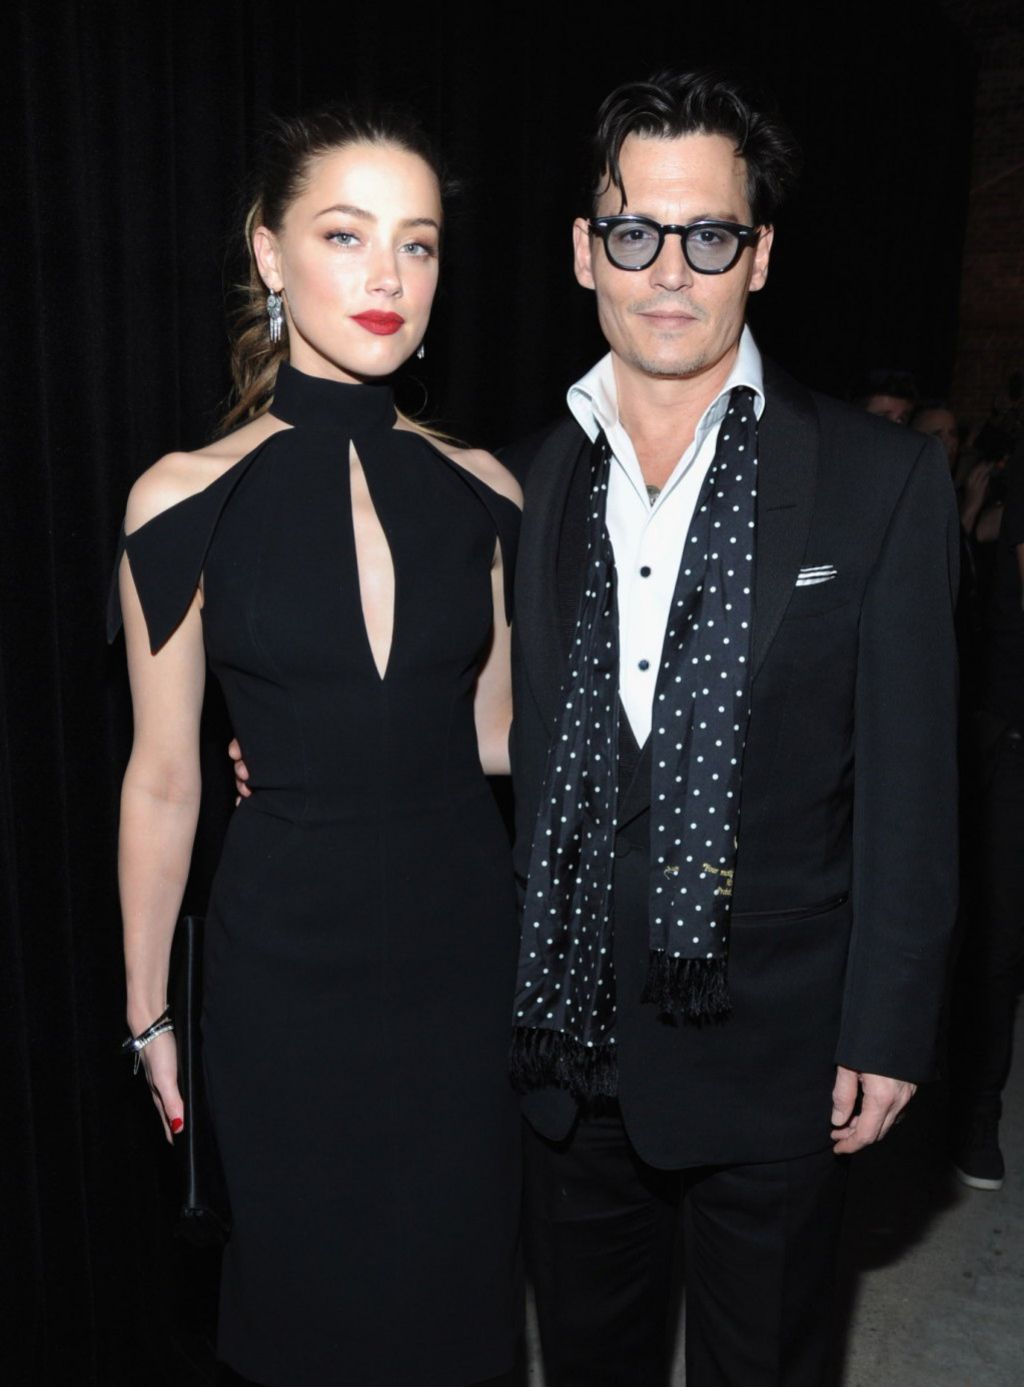 Amber Heard and Johnny Depp - Spike TV's Don Rickles One Night Only Show in NYC - May 20141024 x 1387